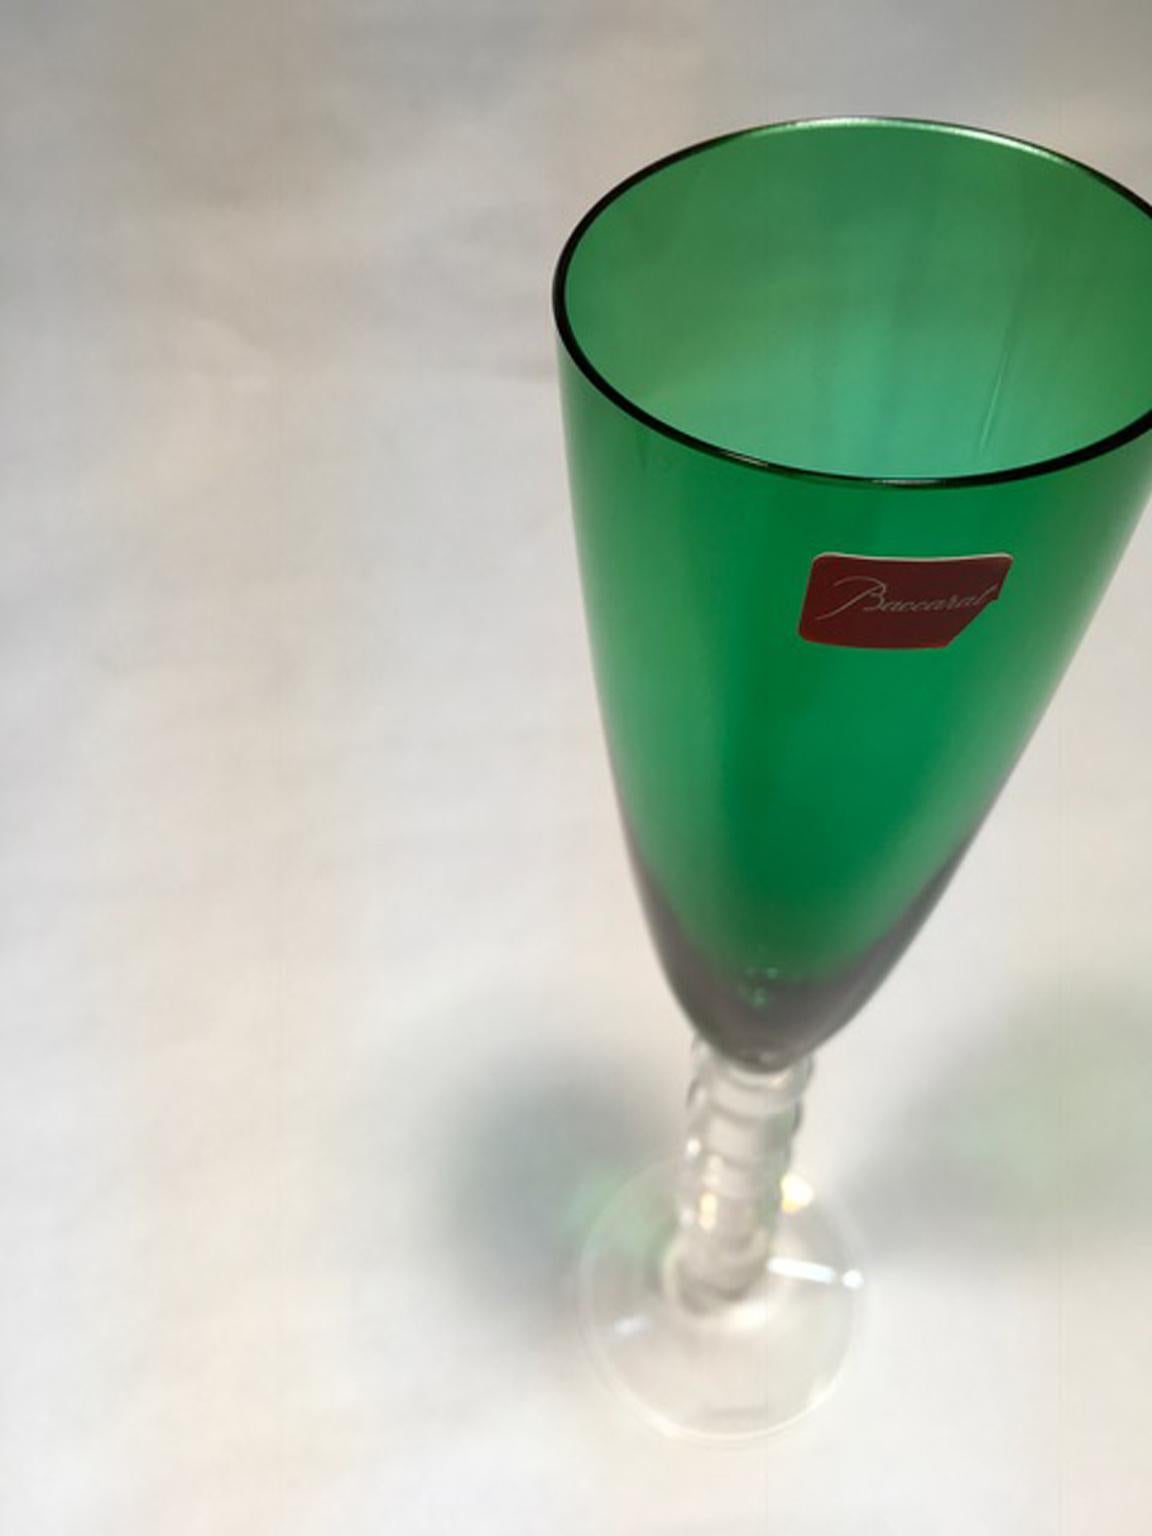 Contemporary Set of Two Baccarat Green Crystal Goblets Glasses, France, 21st Century